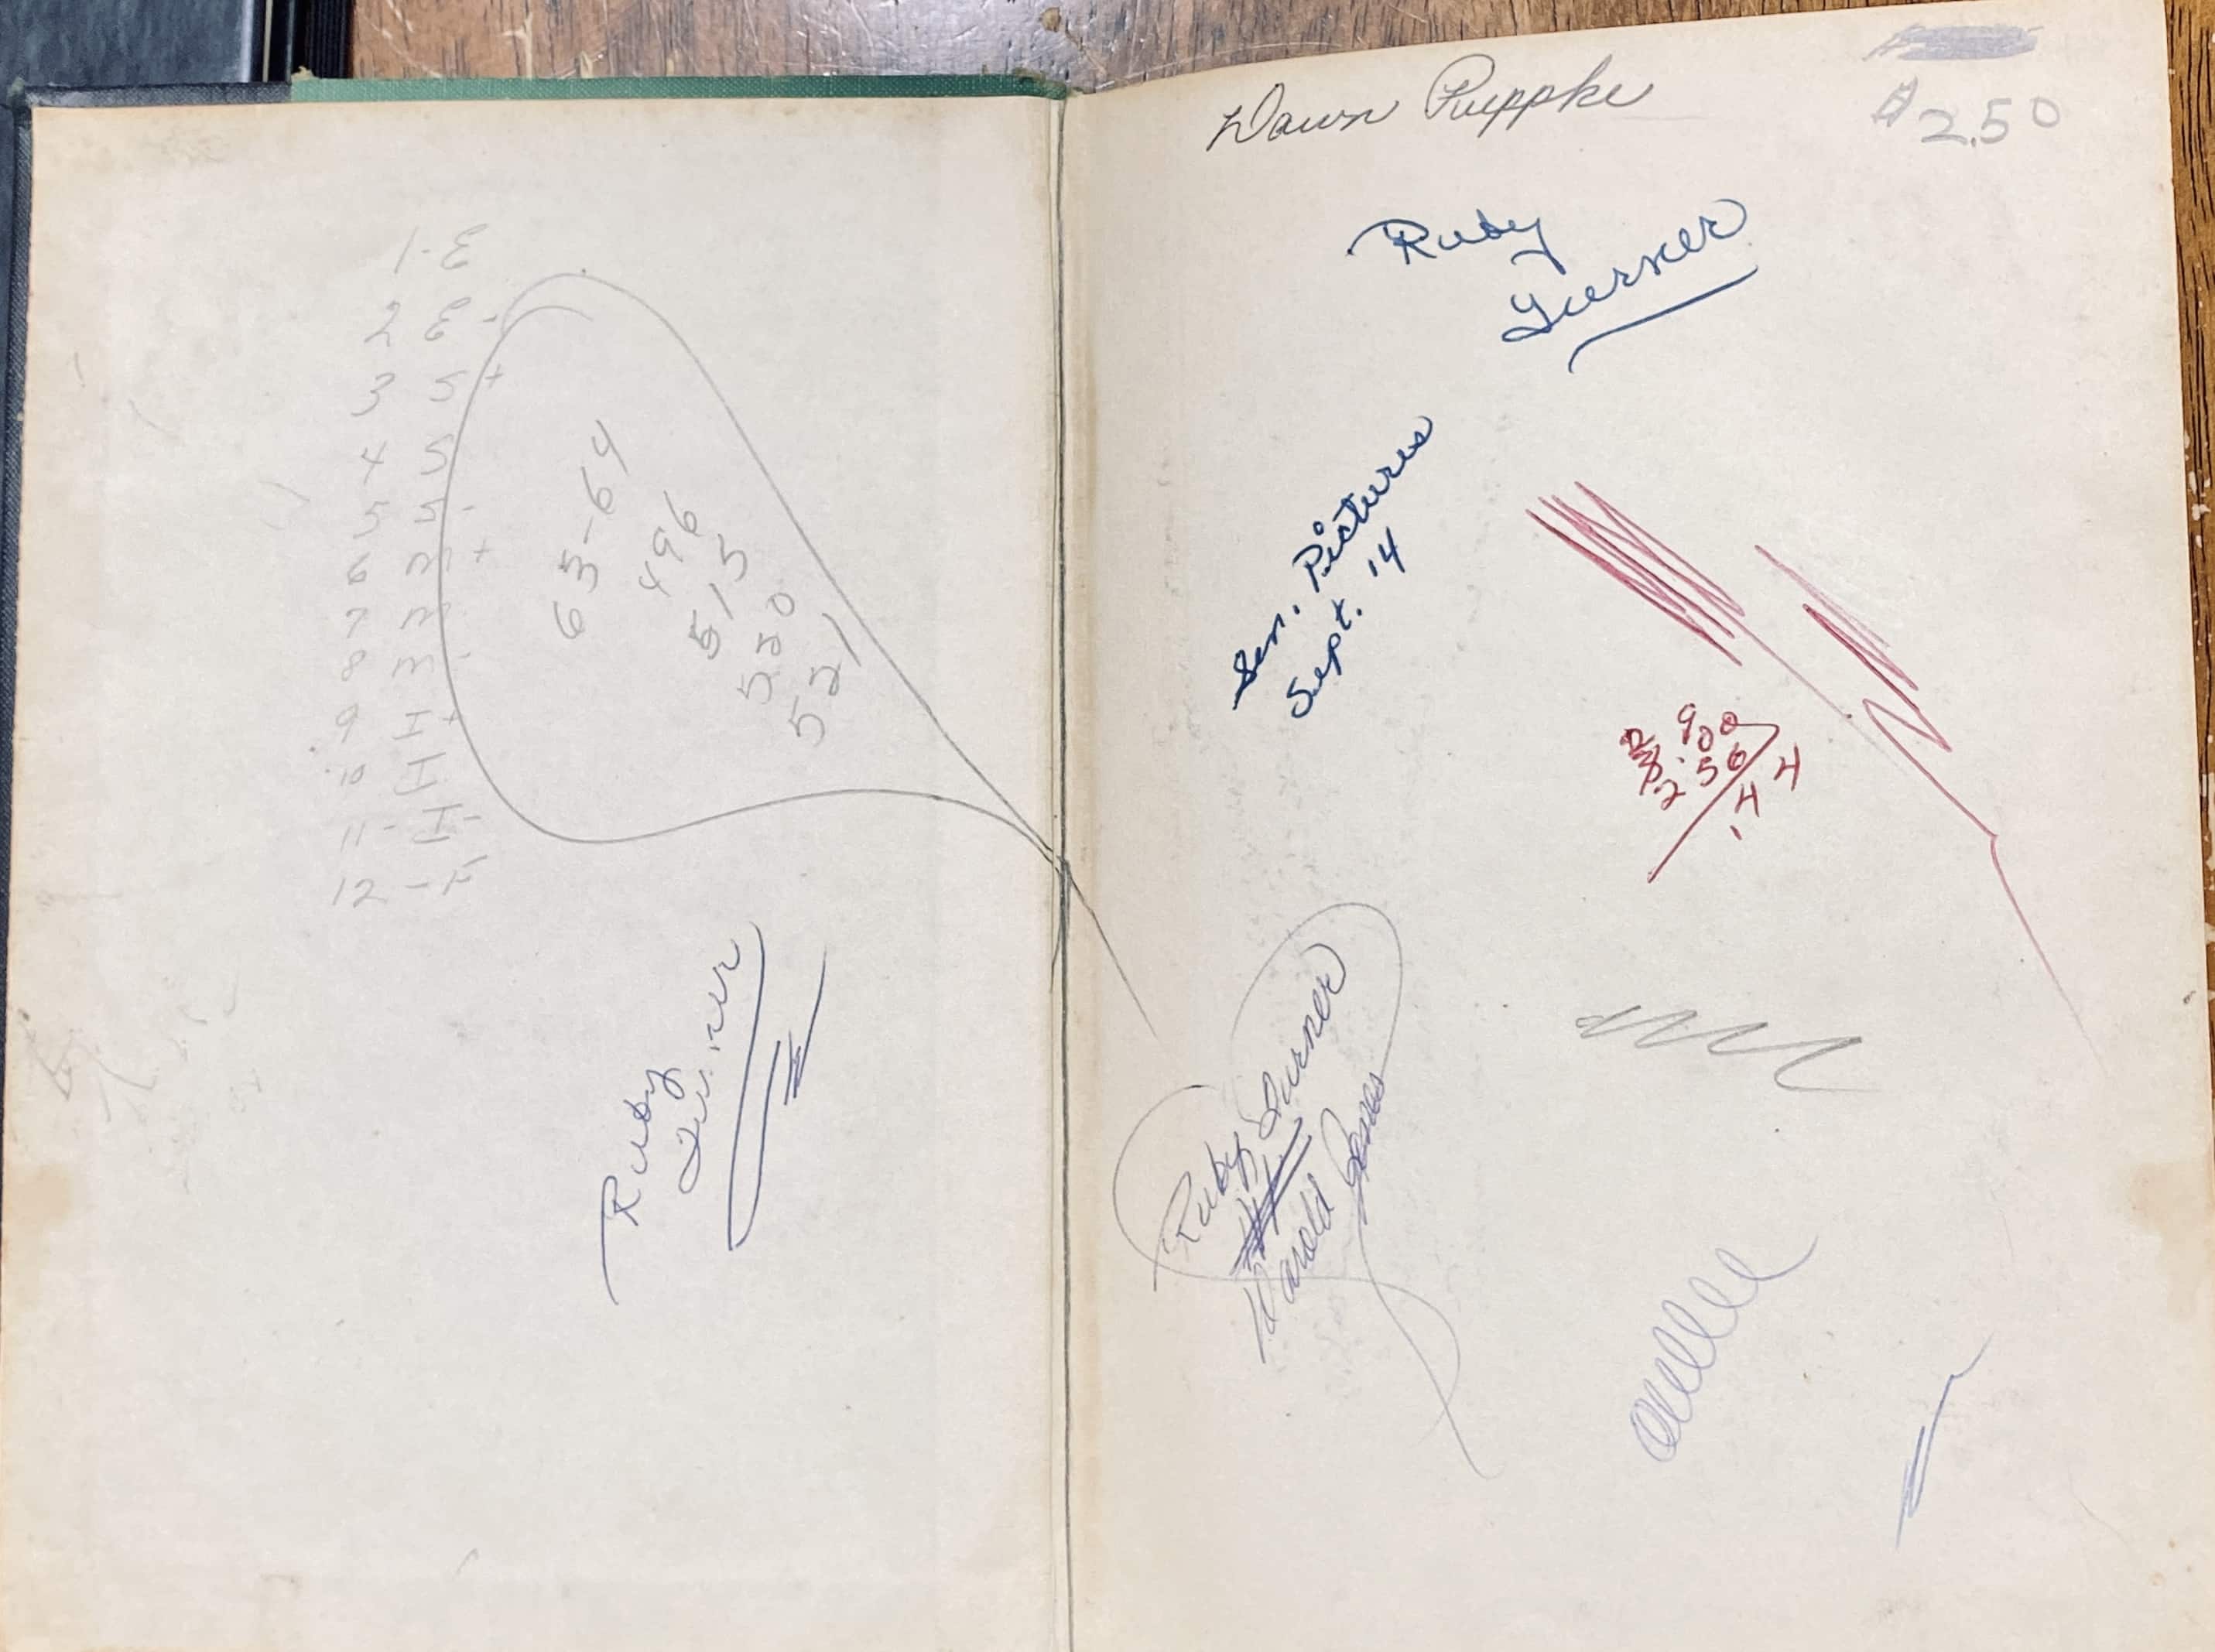 The ephemera of student life in the front cover of a Gregg shorthand book.